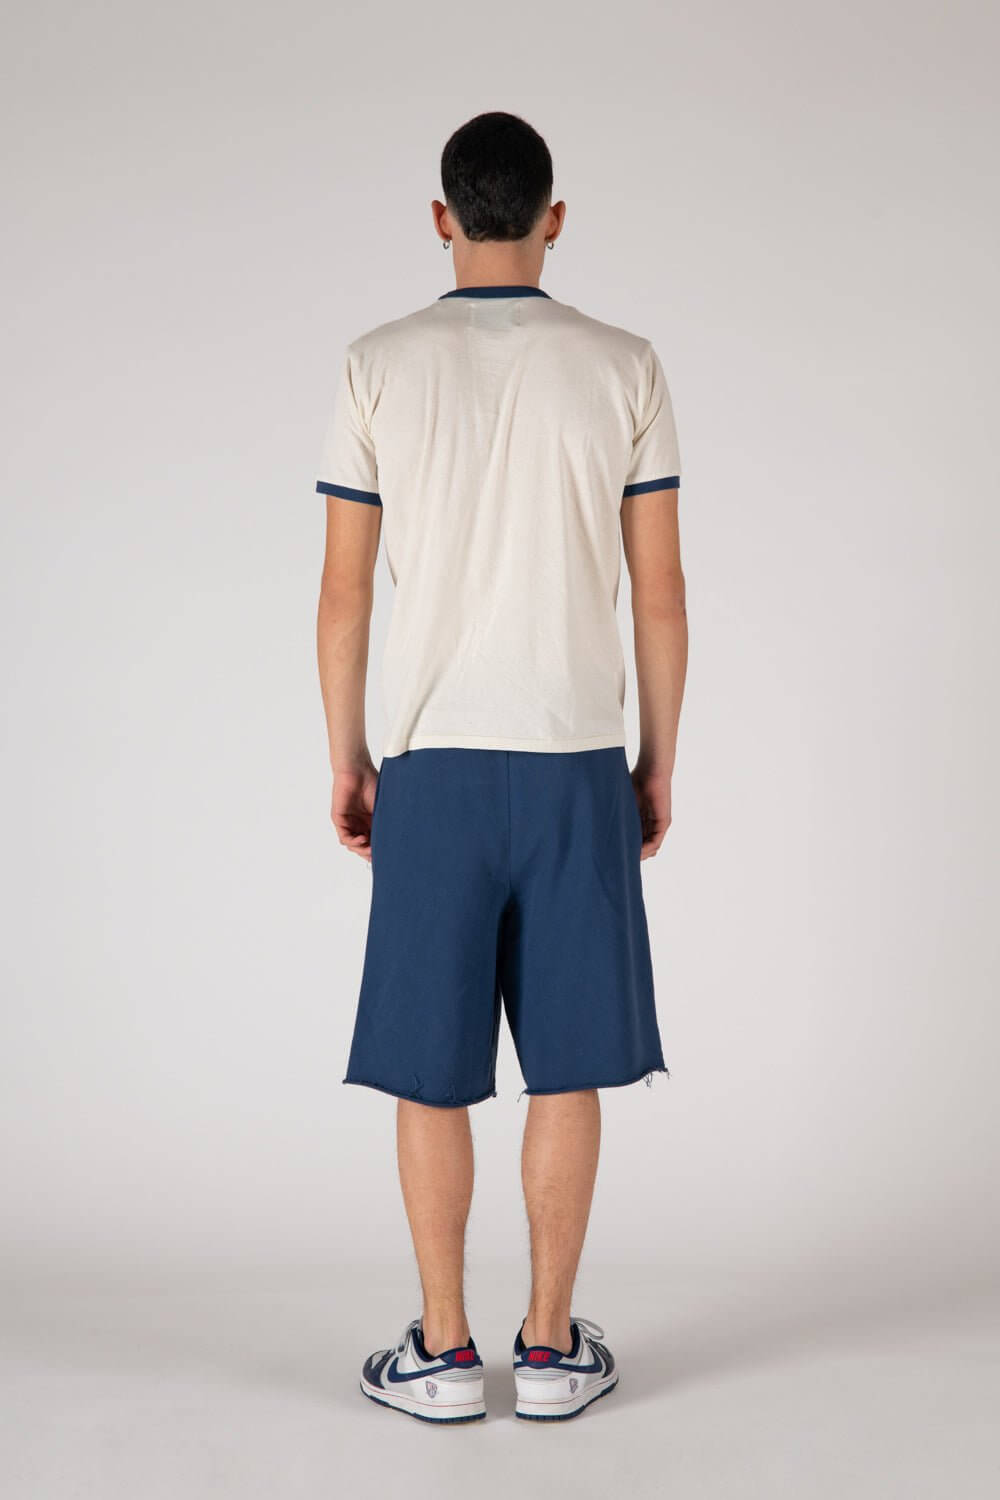 LEGLESS - H Logo cotton sweat SS22 Man shorts. Elastic waistband with drawstring, raw cut cuffs at hem. Front logo patch details. Two side pockets. Composition: 100% Cotton HTC LOS ANGELES